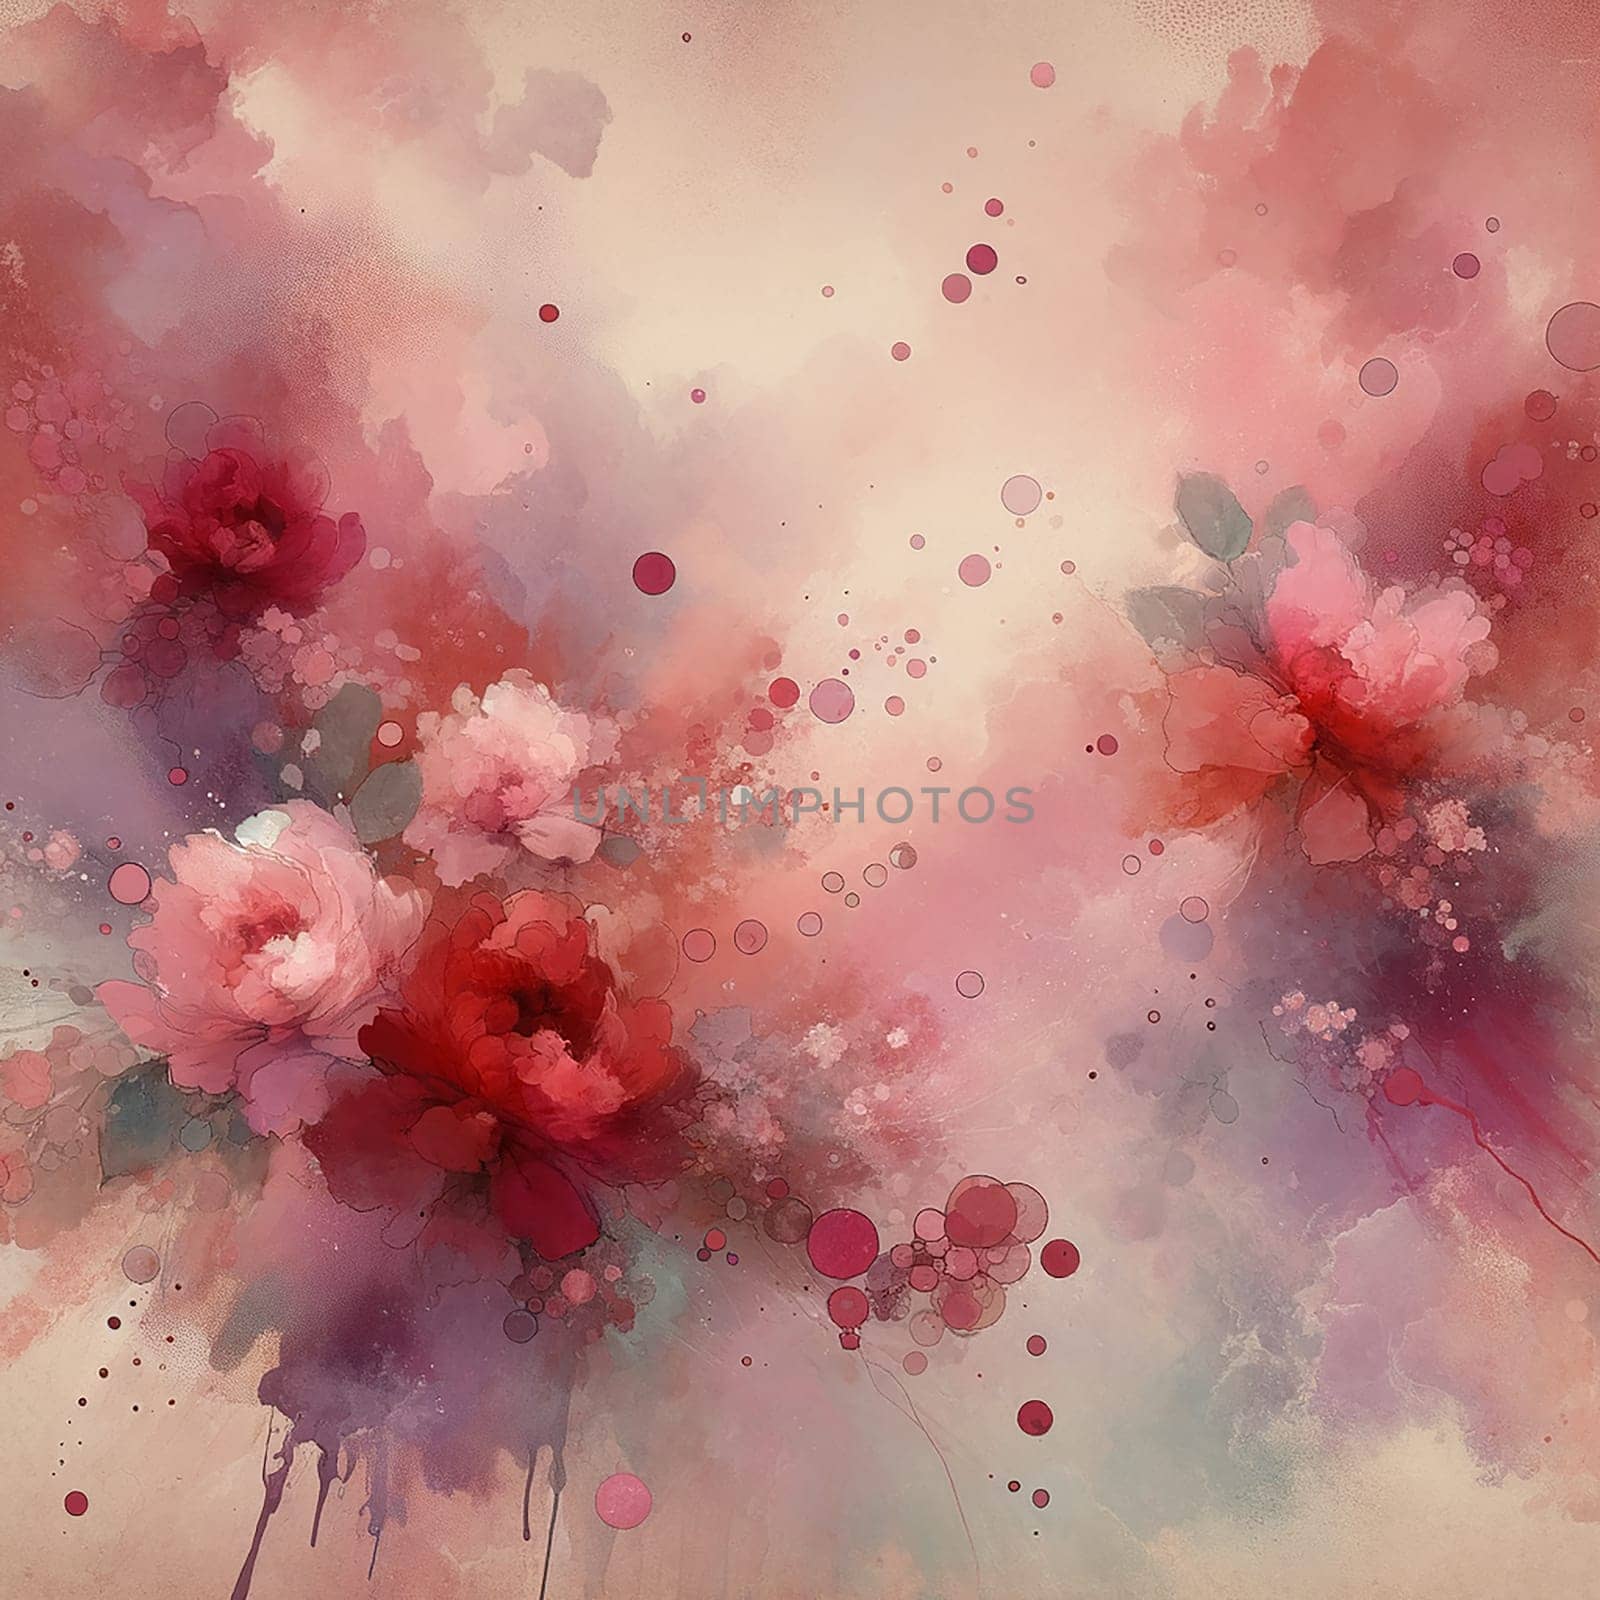 Elegant Essence: Chic Vector Art in Soft Pink Hues by Petrichor